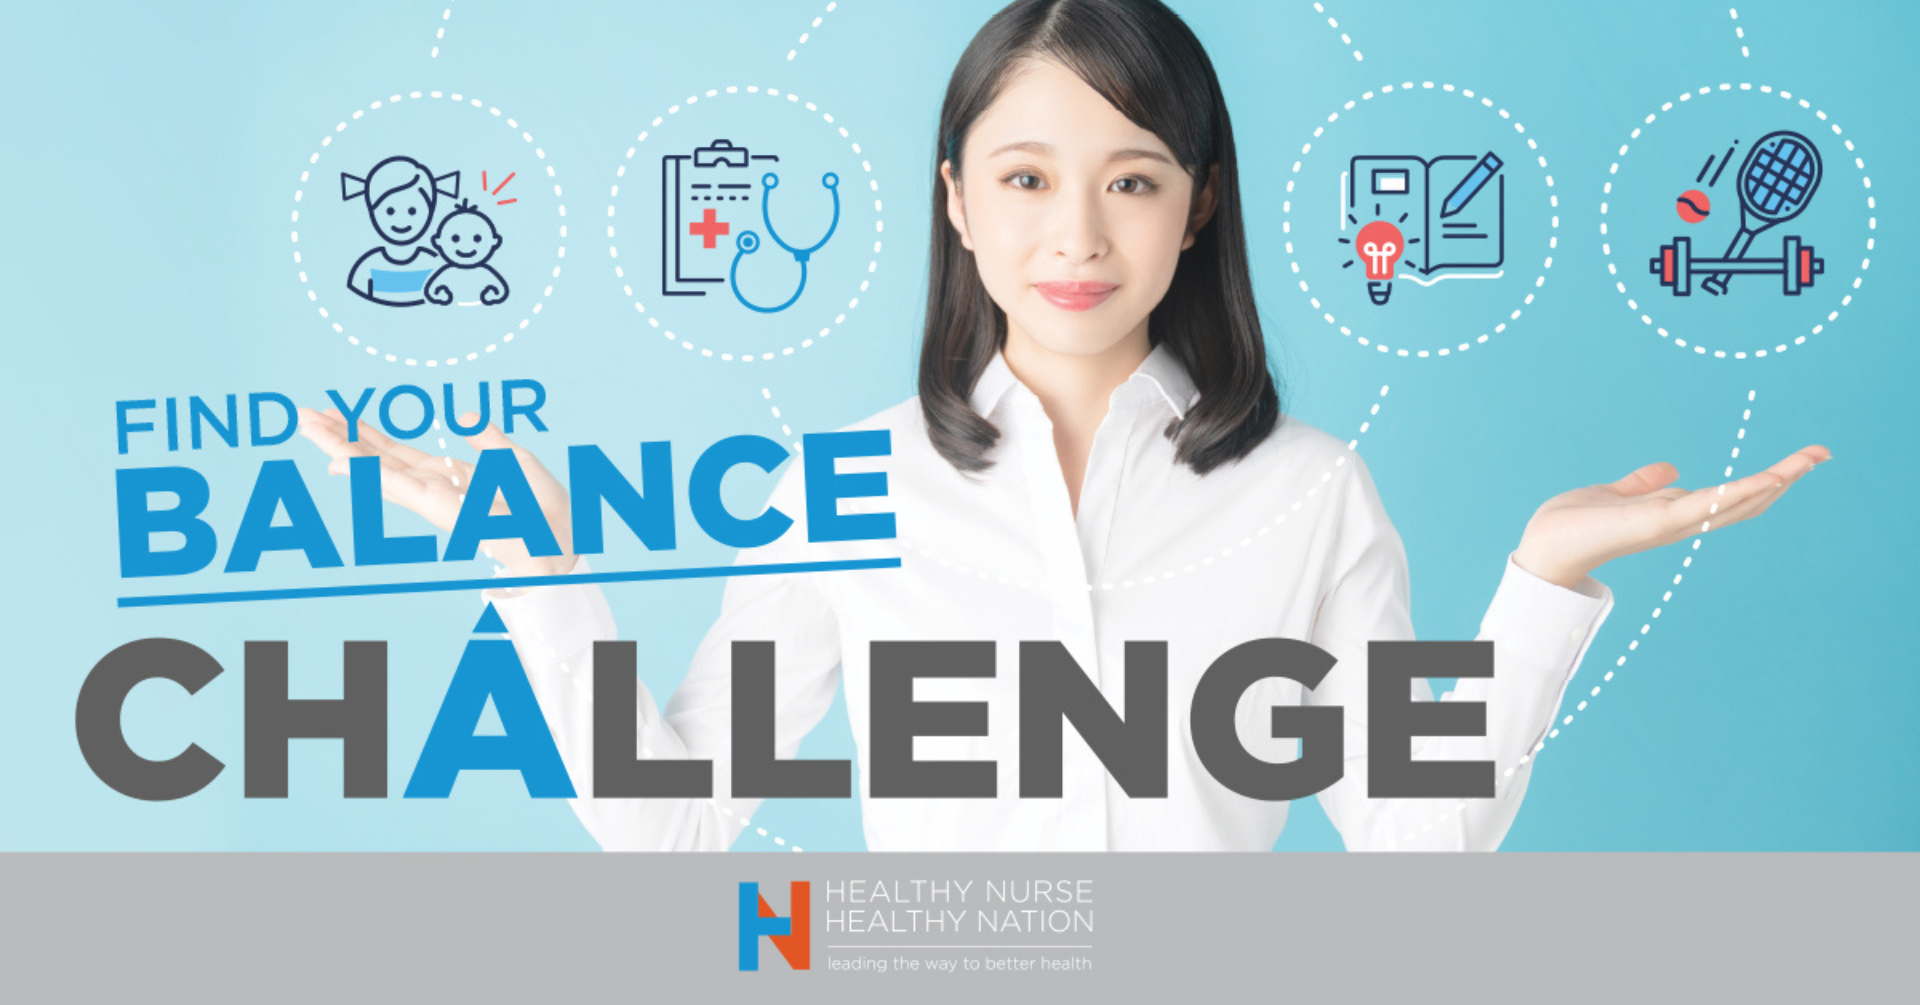 Do a Work-life Balance Pulse Check - Healthy Nurse, Healthy Nation - Find Your Balance challenge - Day 1 4638